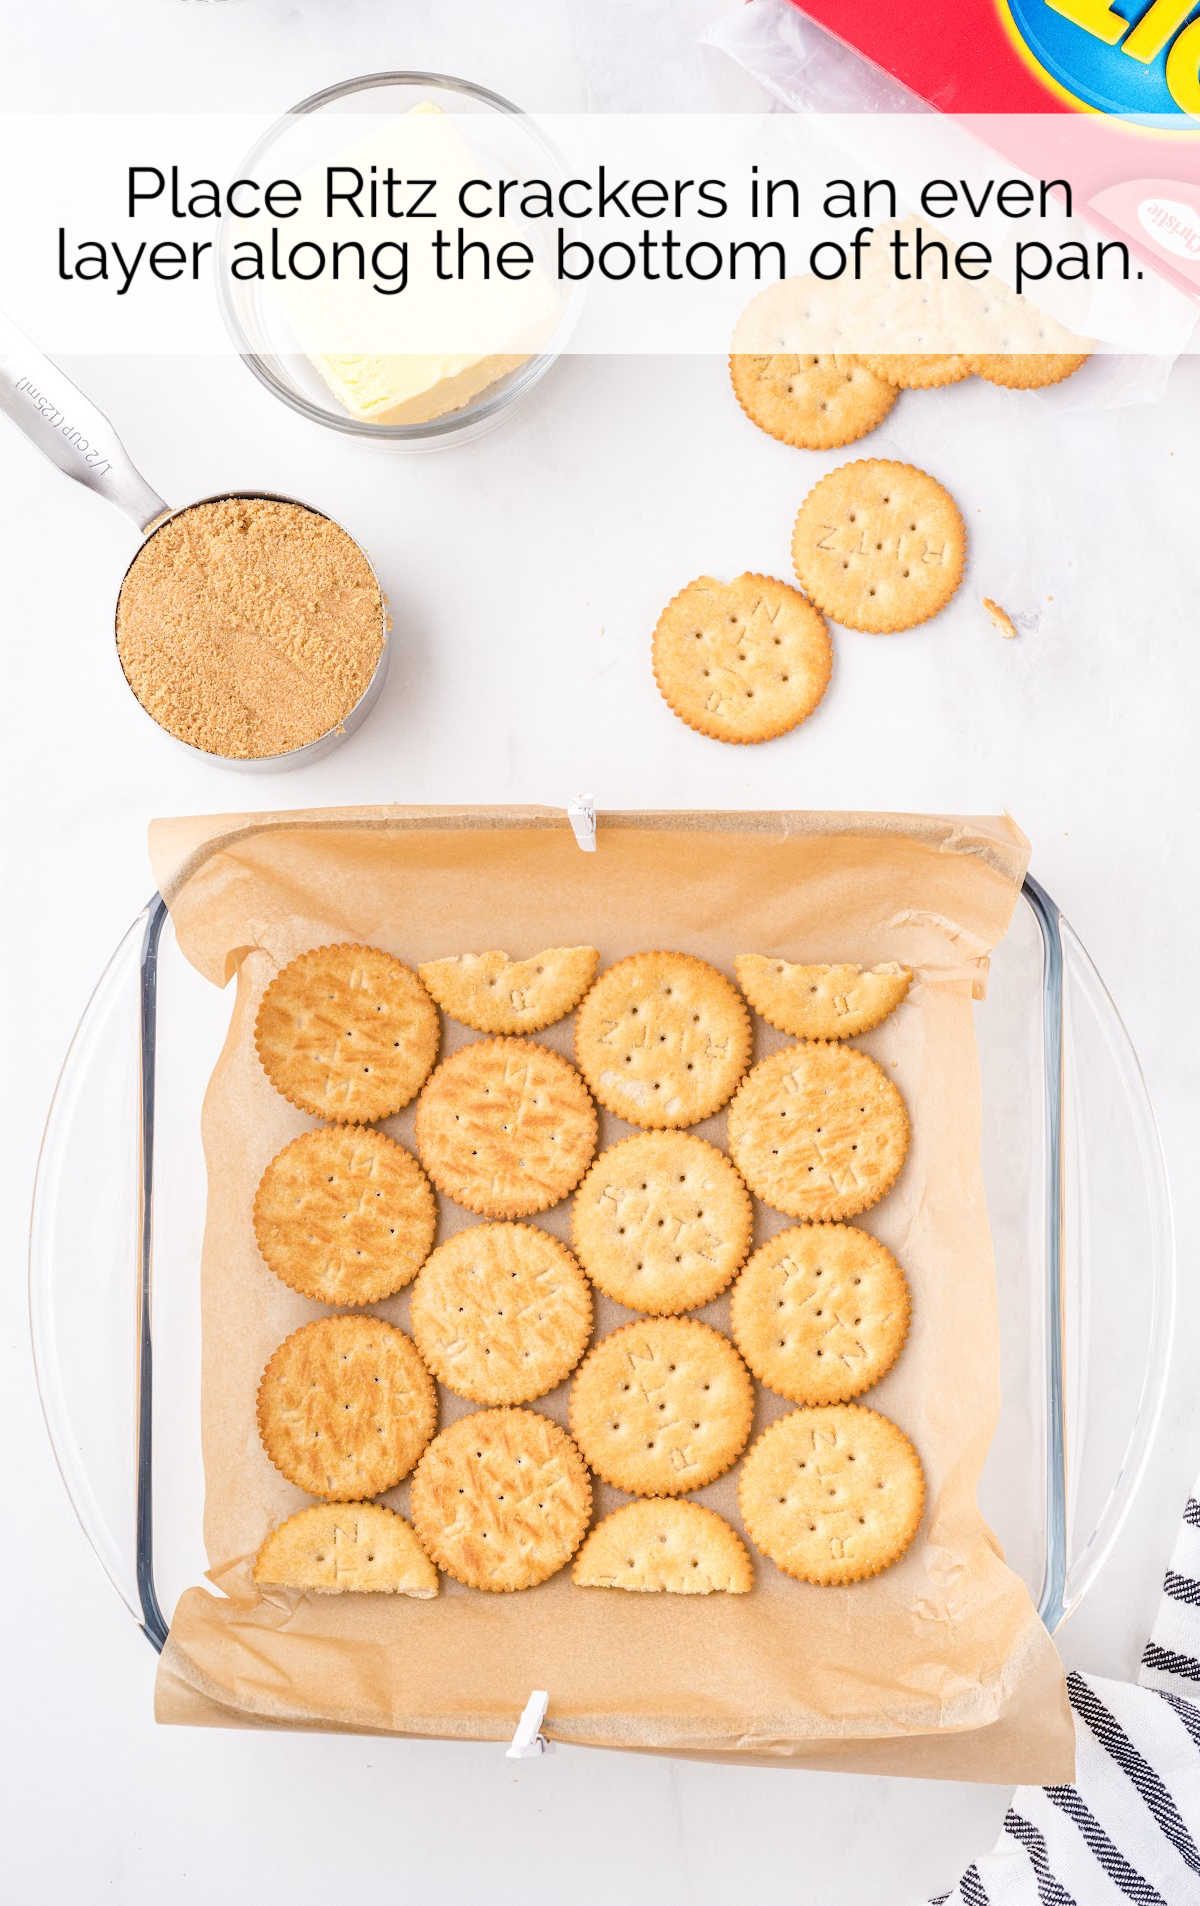 ritz crackers placed at the bottom of a pan